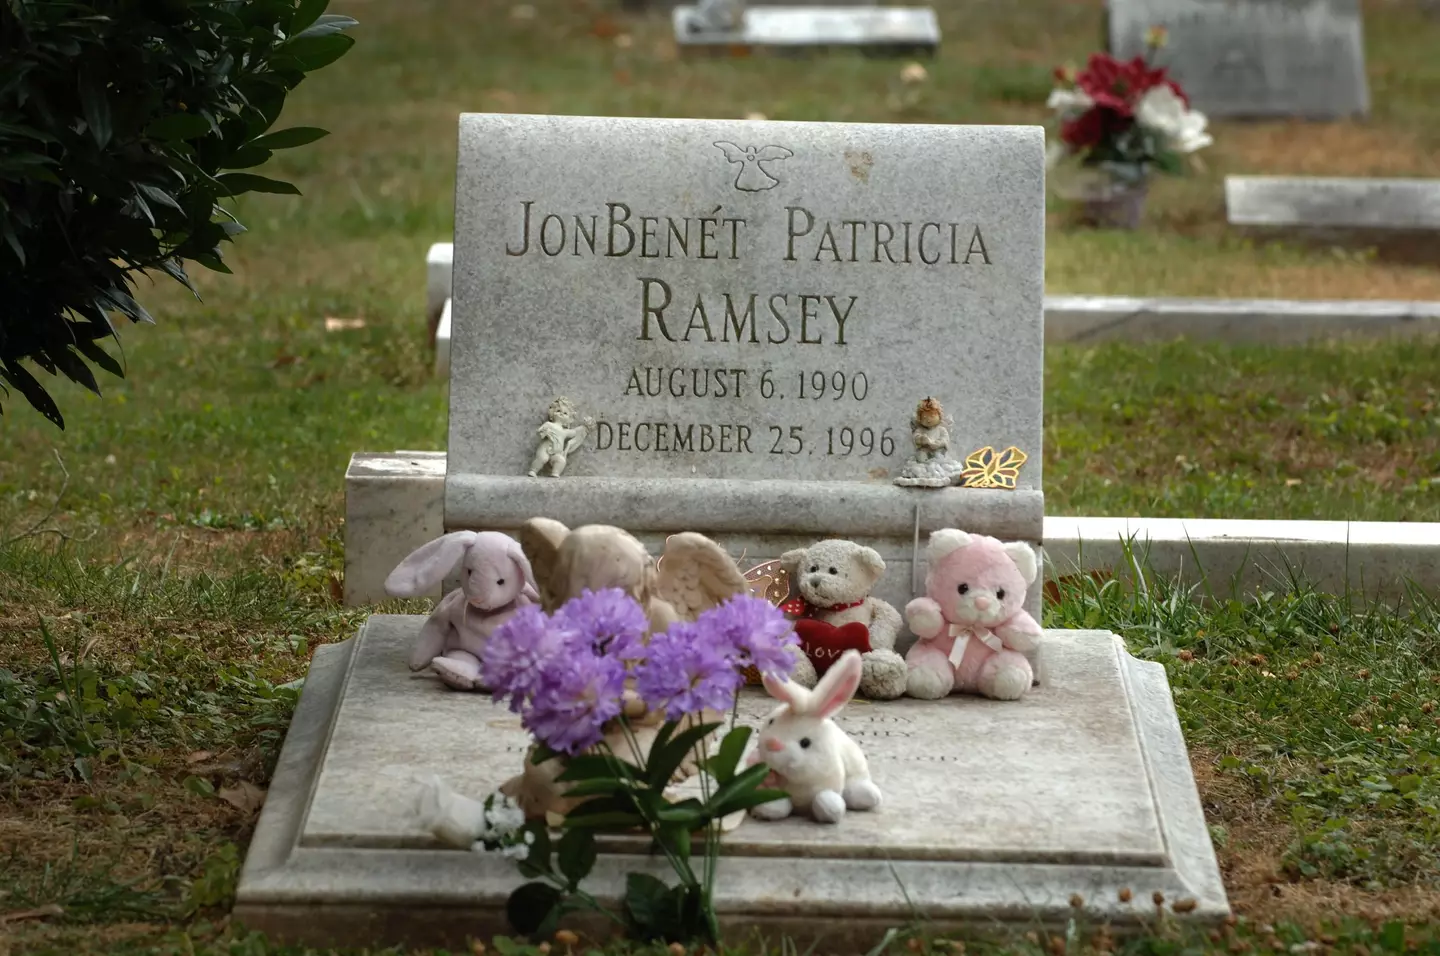 JonBenet Ramsey died in 1996 when she was just six years old.